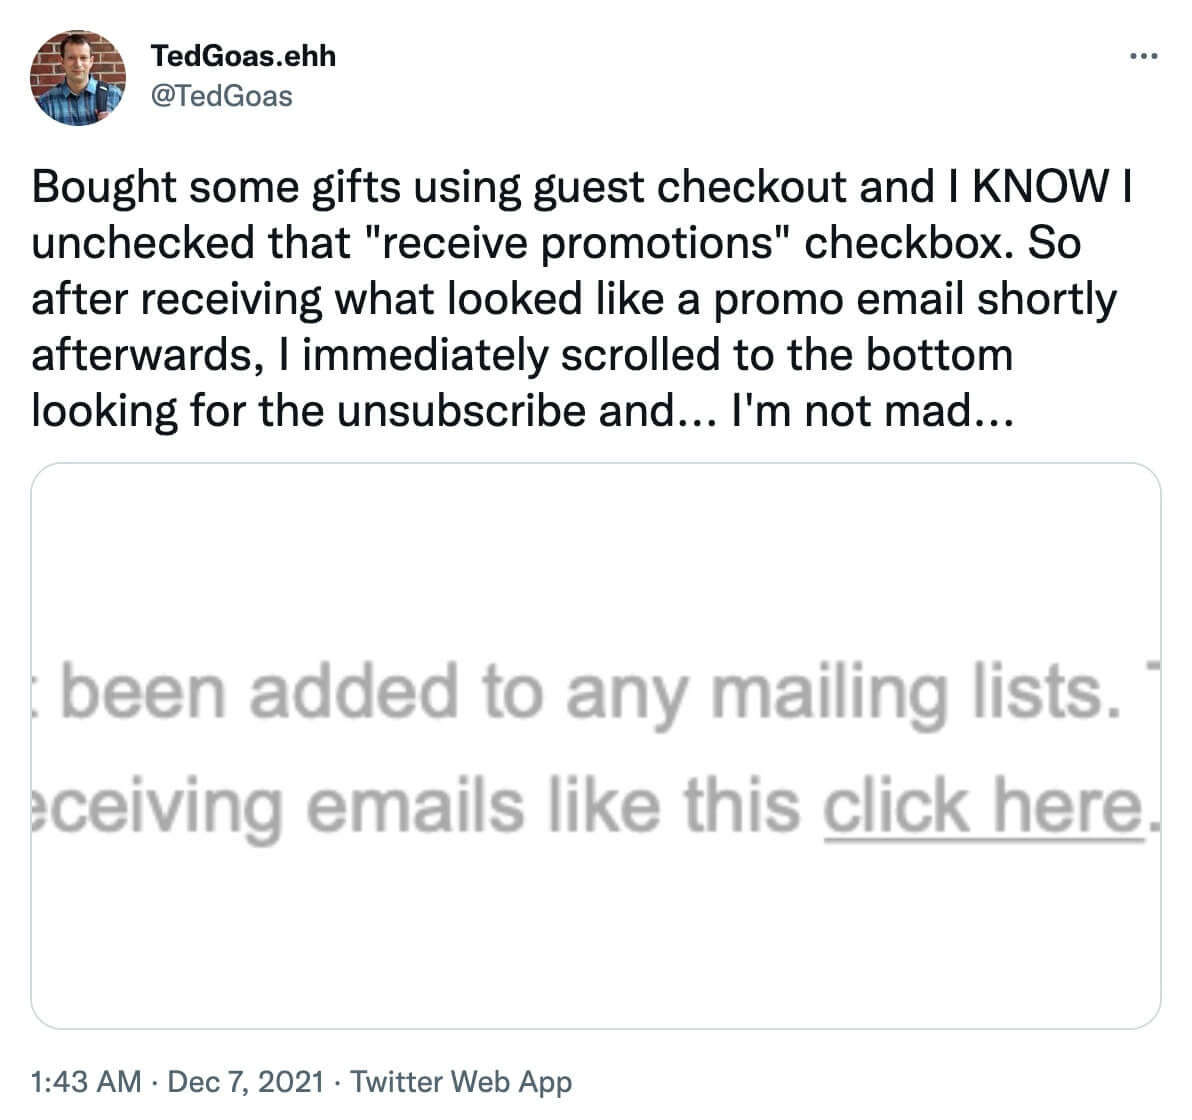 @TedGoas on Twitter: Bought some gifts using guest checkout and I KNOW I unchecked that receive promotions checkbox. So after receiving what looked like a promo email shortly afterwards, I immediately scrolled to the bottom looking for the unsubscribe and...I'm not mad... [screenshot of unsubscribe message]